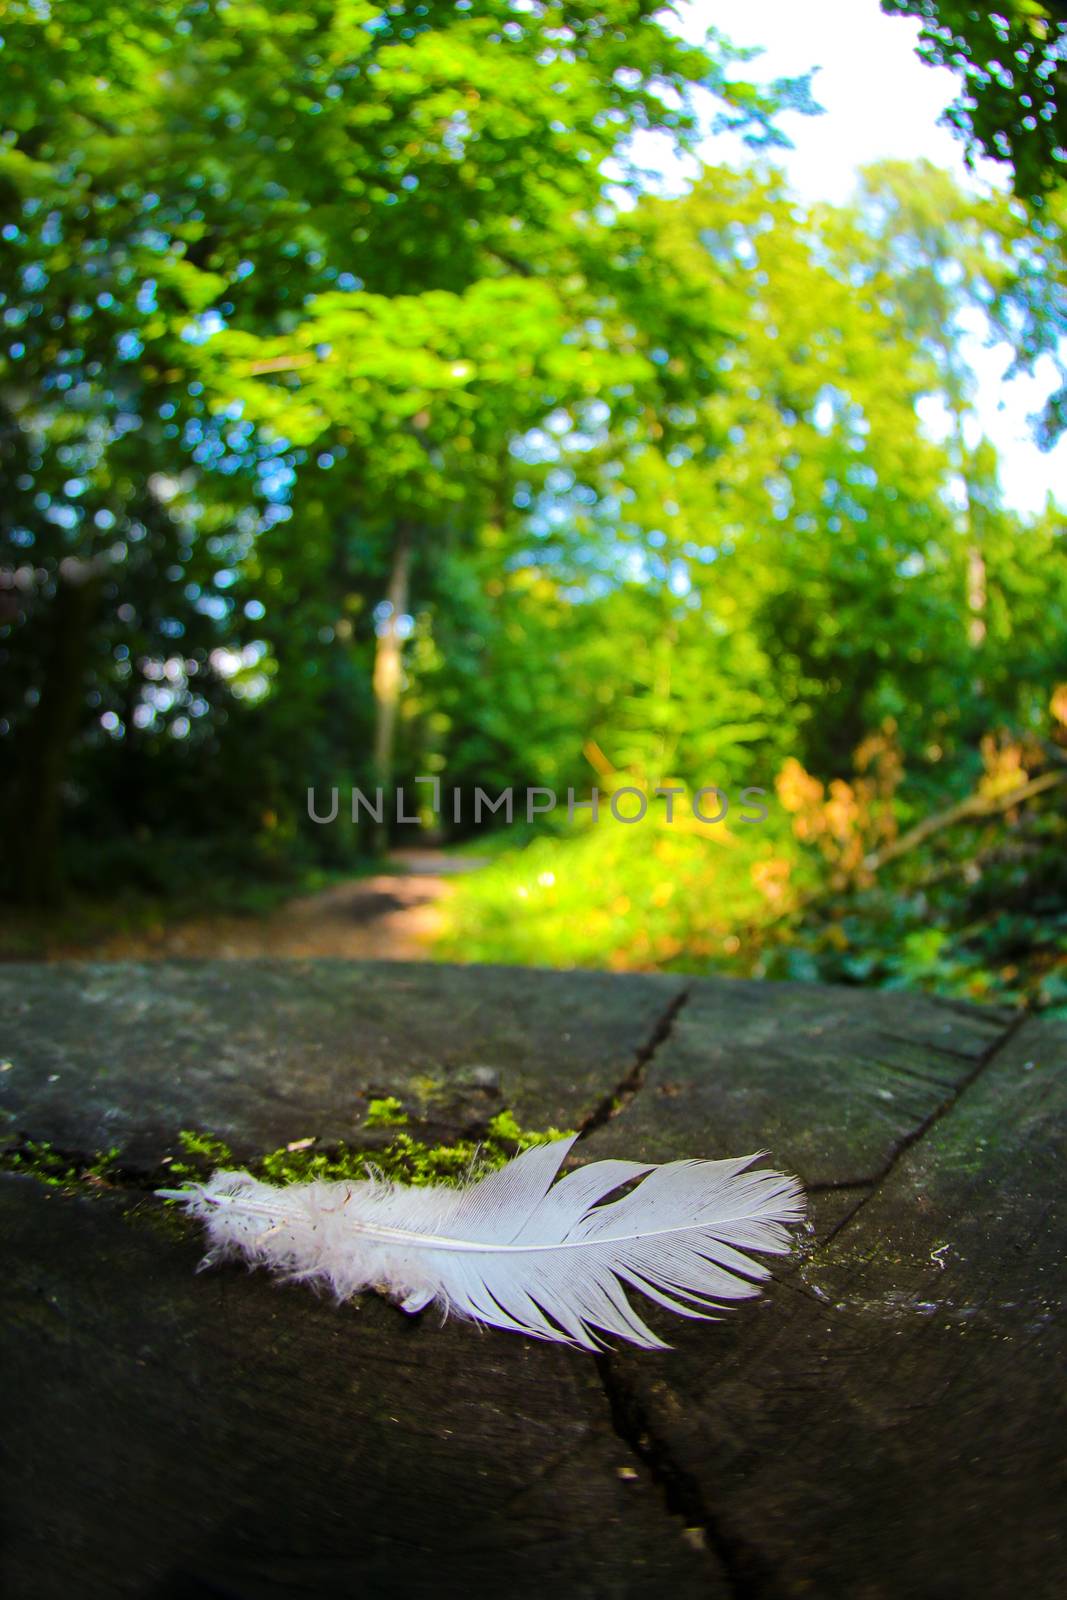 Feather on ground in a green forrest area